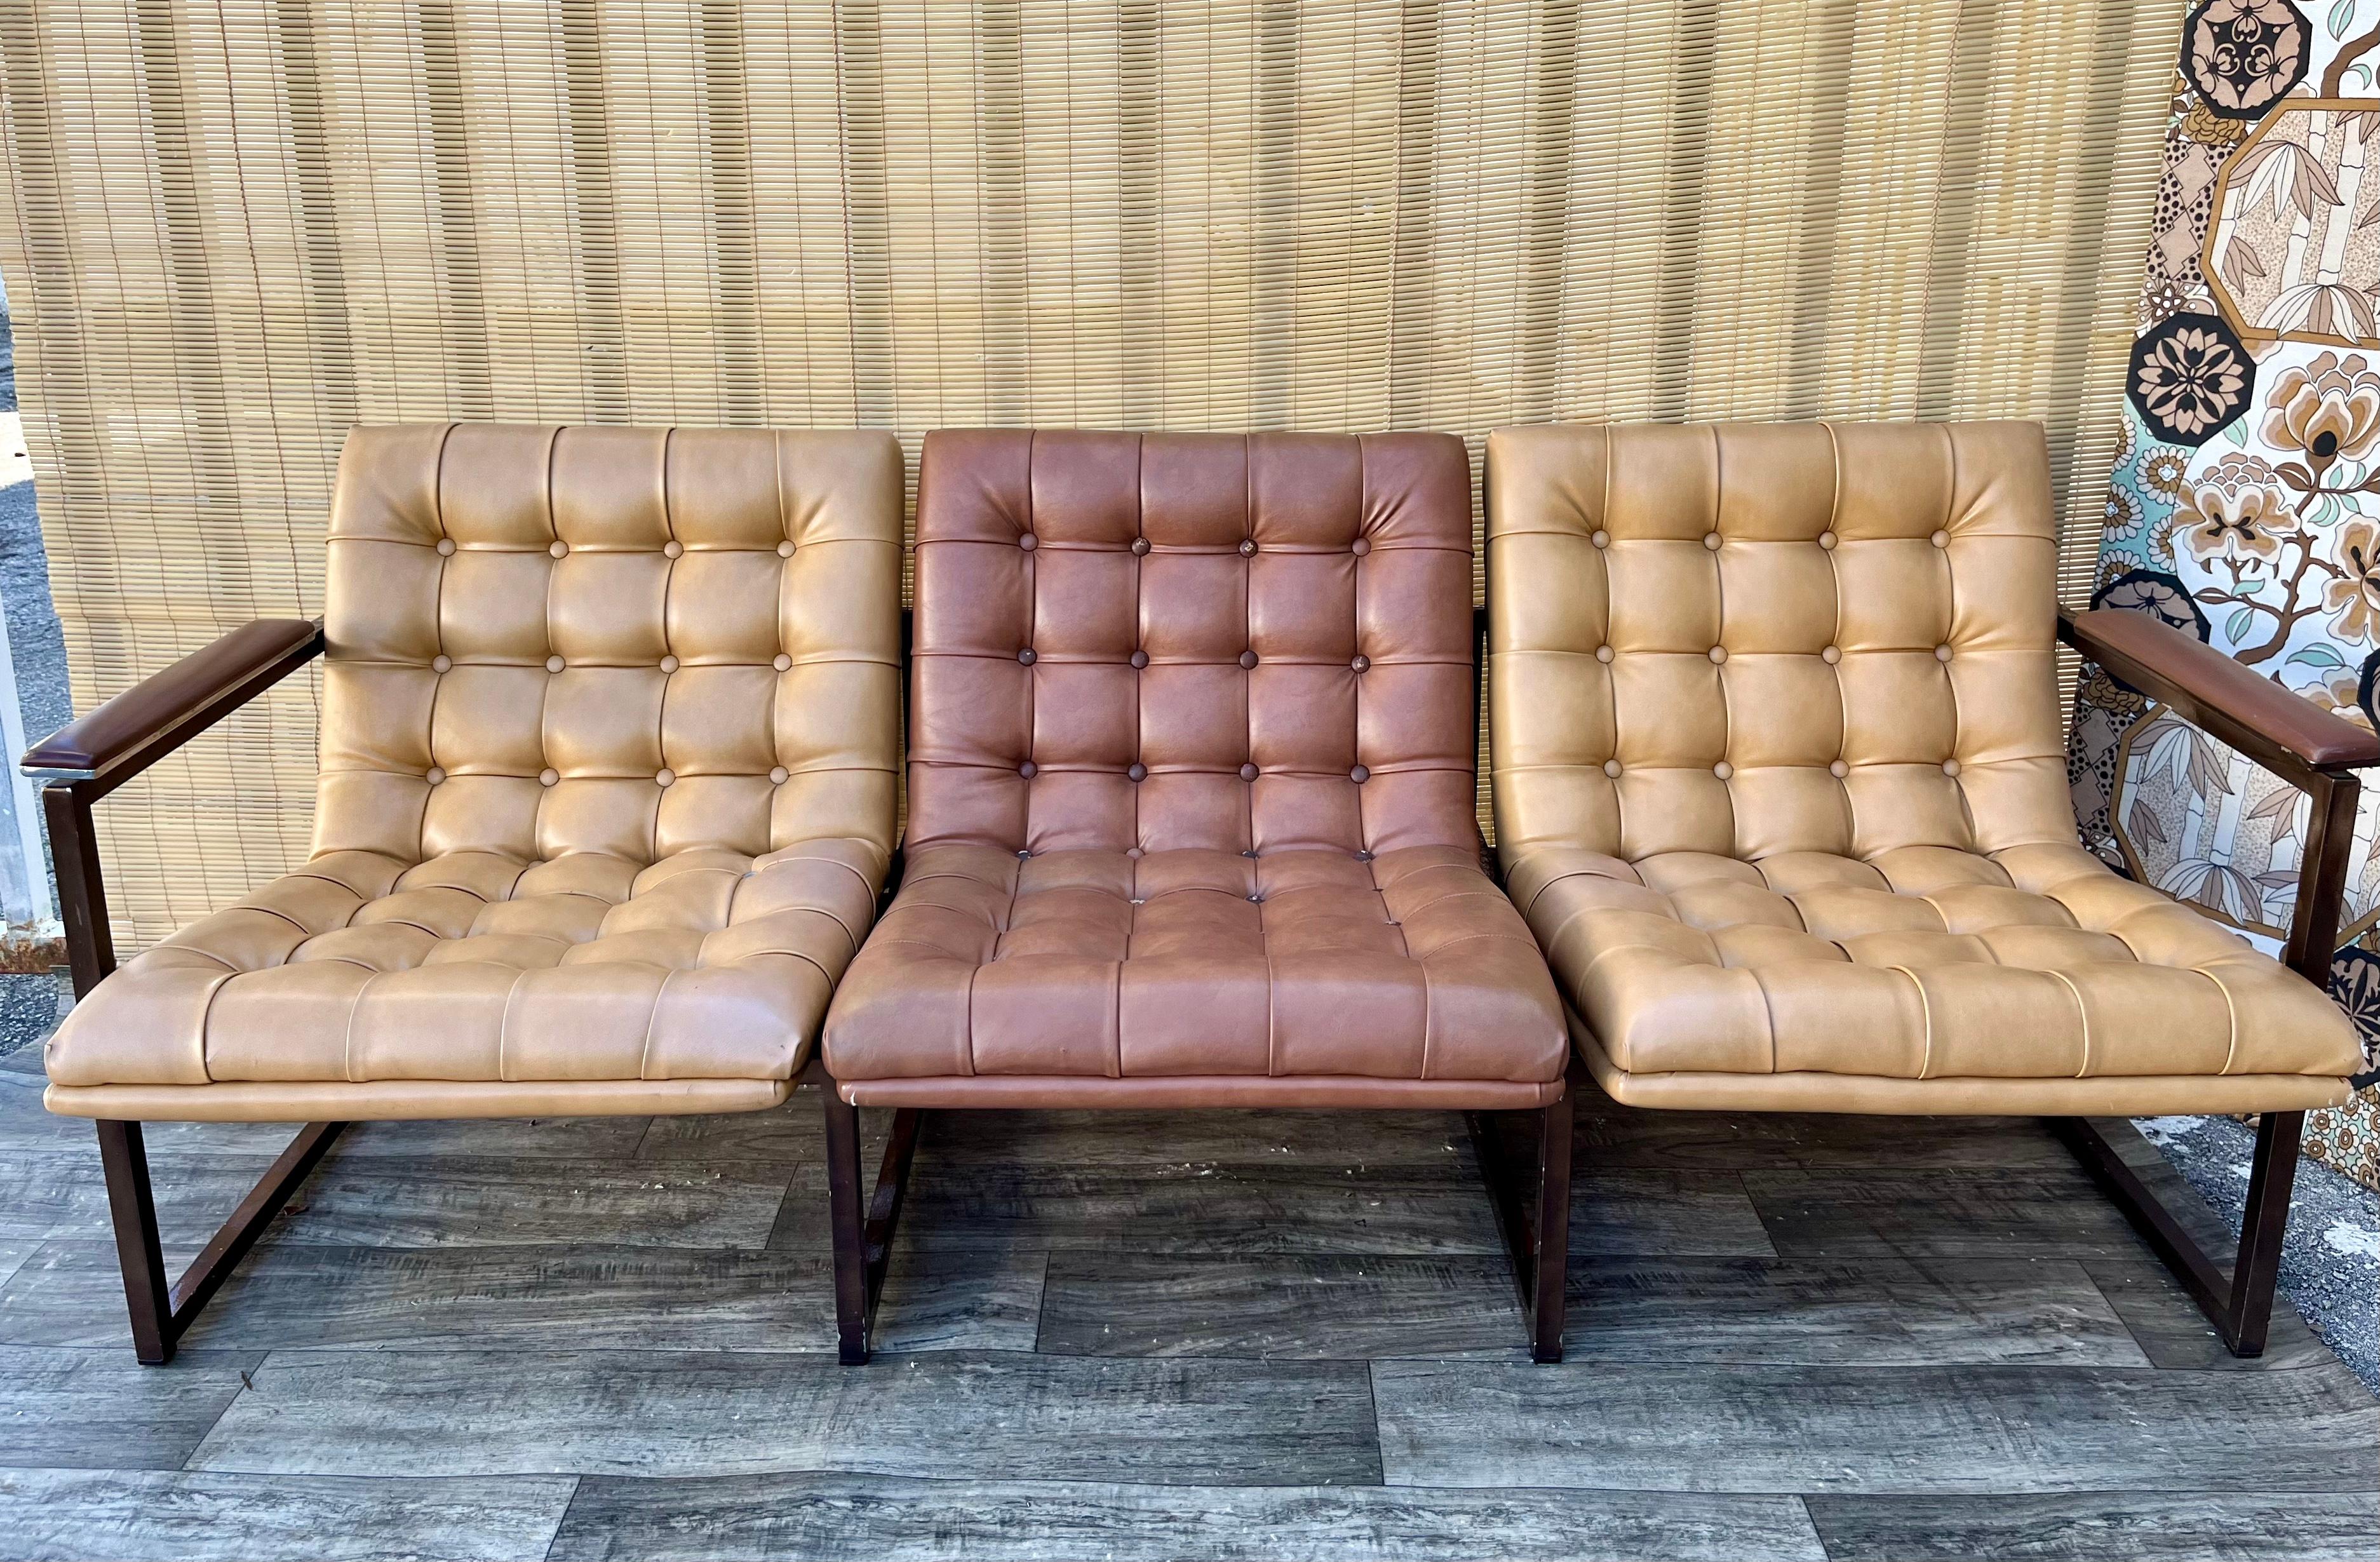 Vintage Mid Century Modern Office Sofa in the Milo Baughman's Style. Circa 1970s
Inspired by Milo Baughman and the Barcelona Chair by Mies Van der Rohe's Designs.
Features a solid metal square frame painted in dark bronze with the original tufted